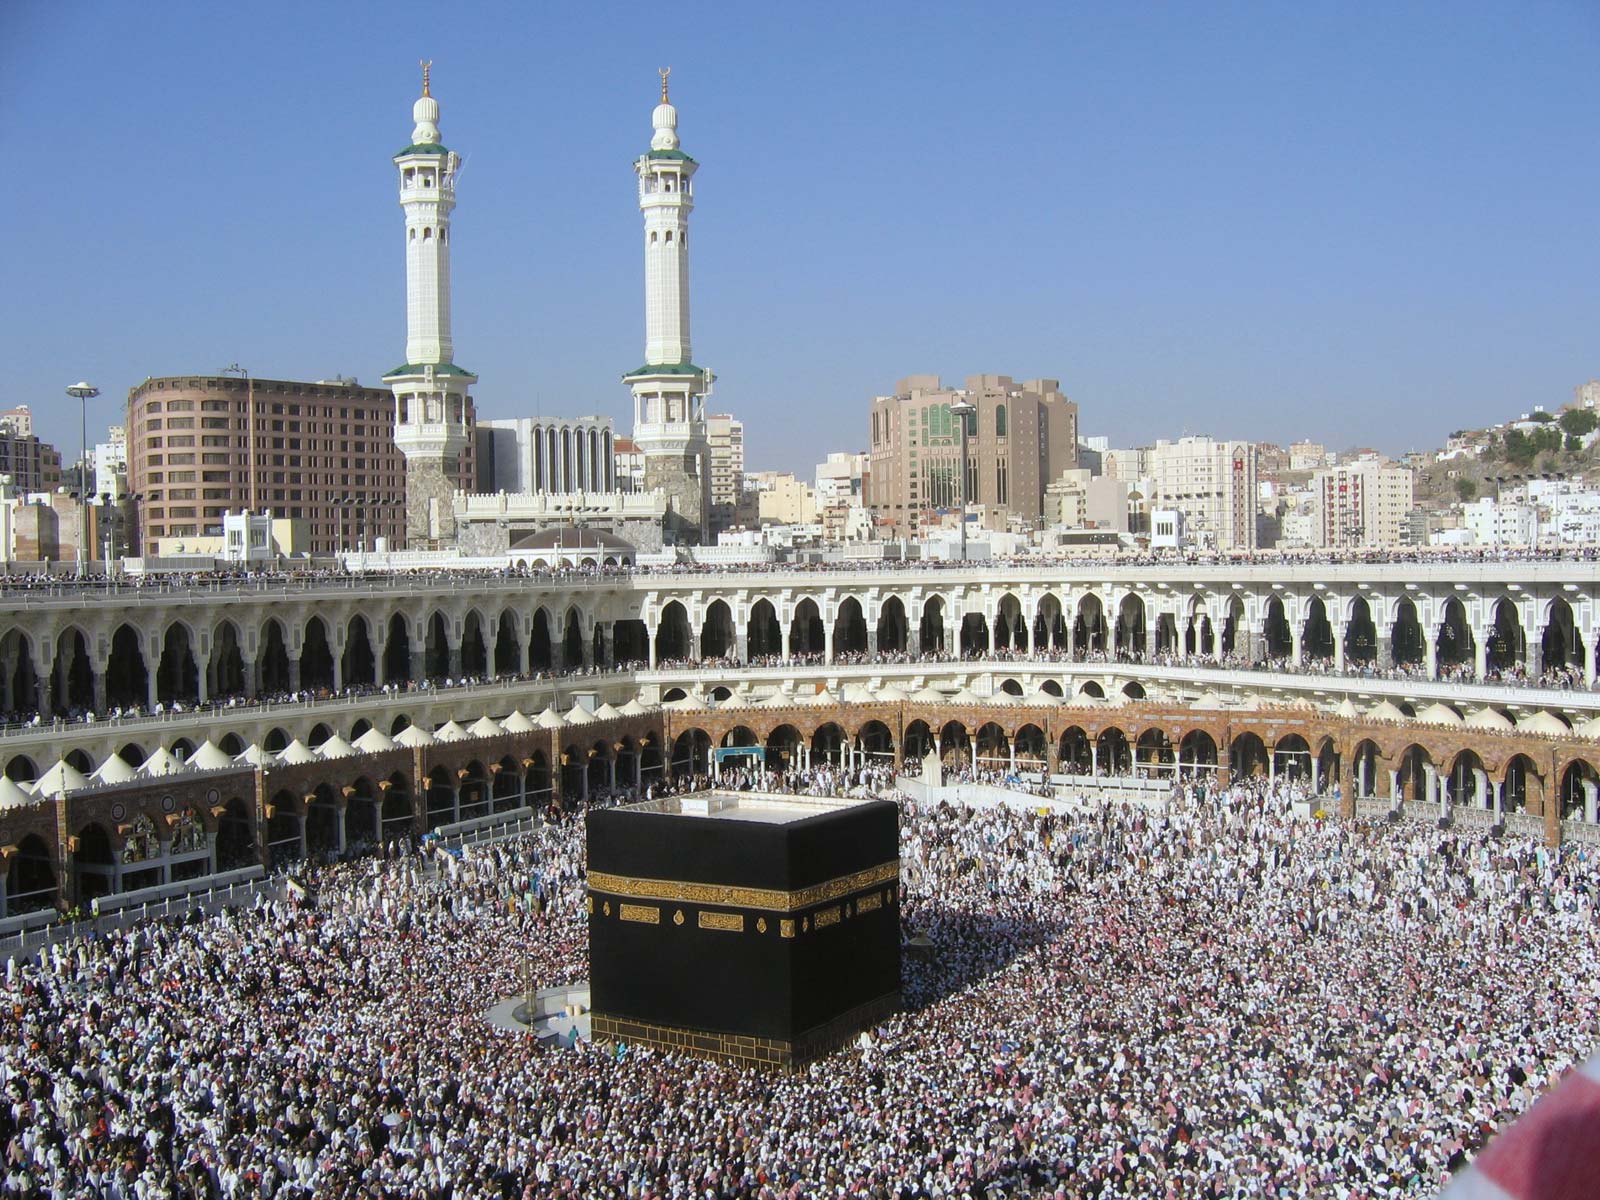 Great Mosque of Mecca. Overview, Description, & Facts